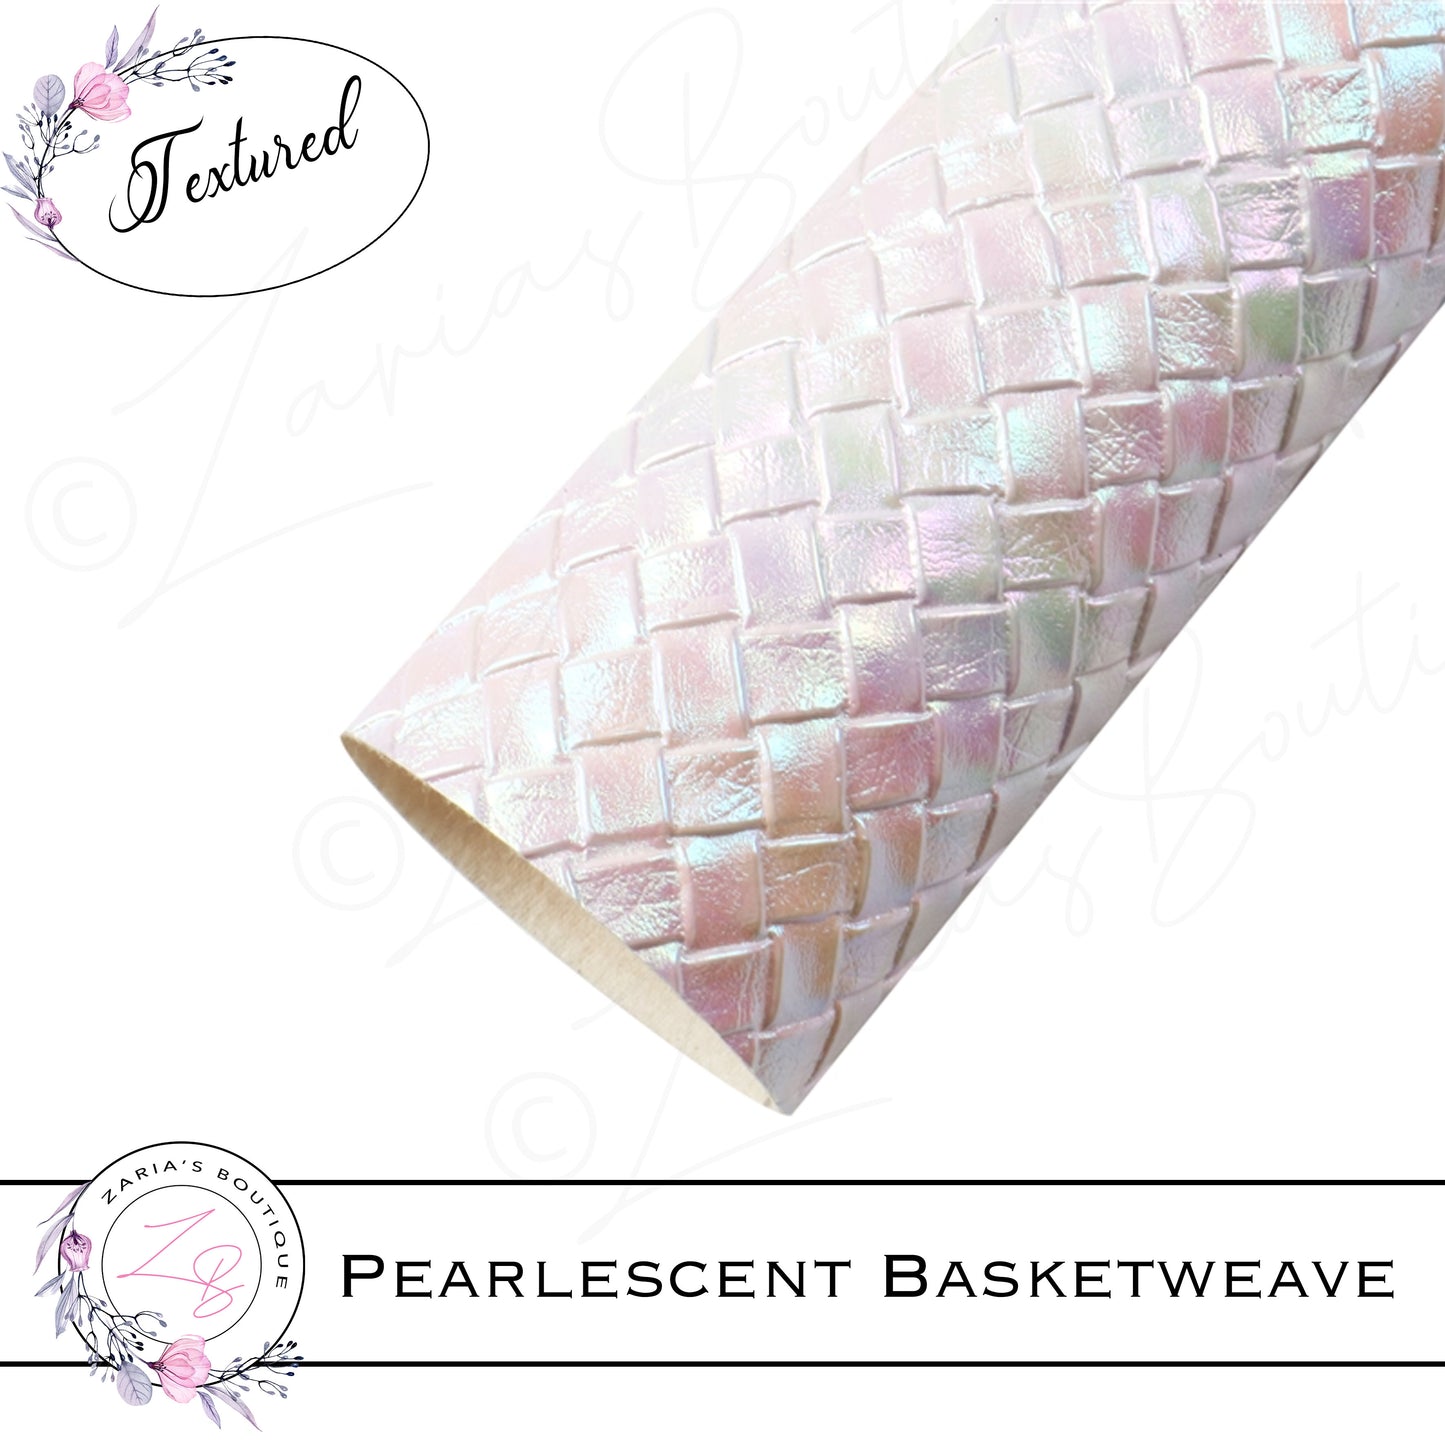 ⋅ Pearlescent Basketweave ⋅ Textured Vegan Faux Leather ⋅